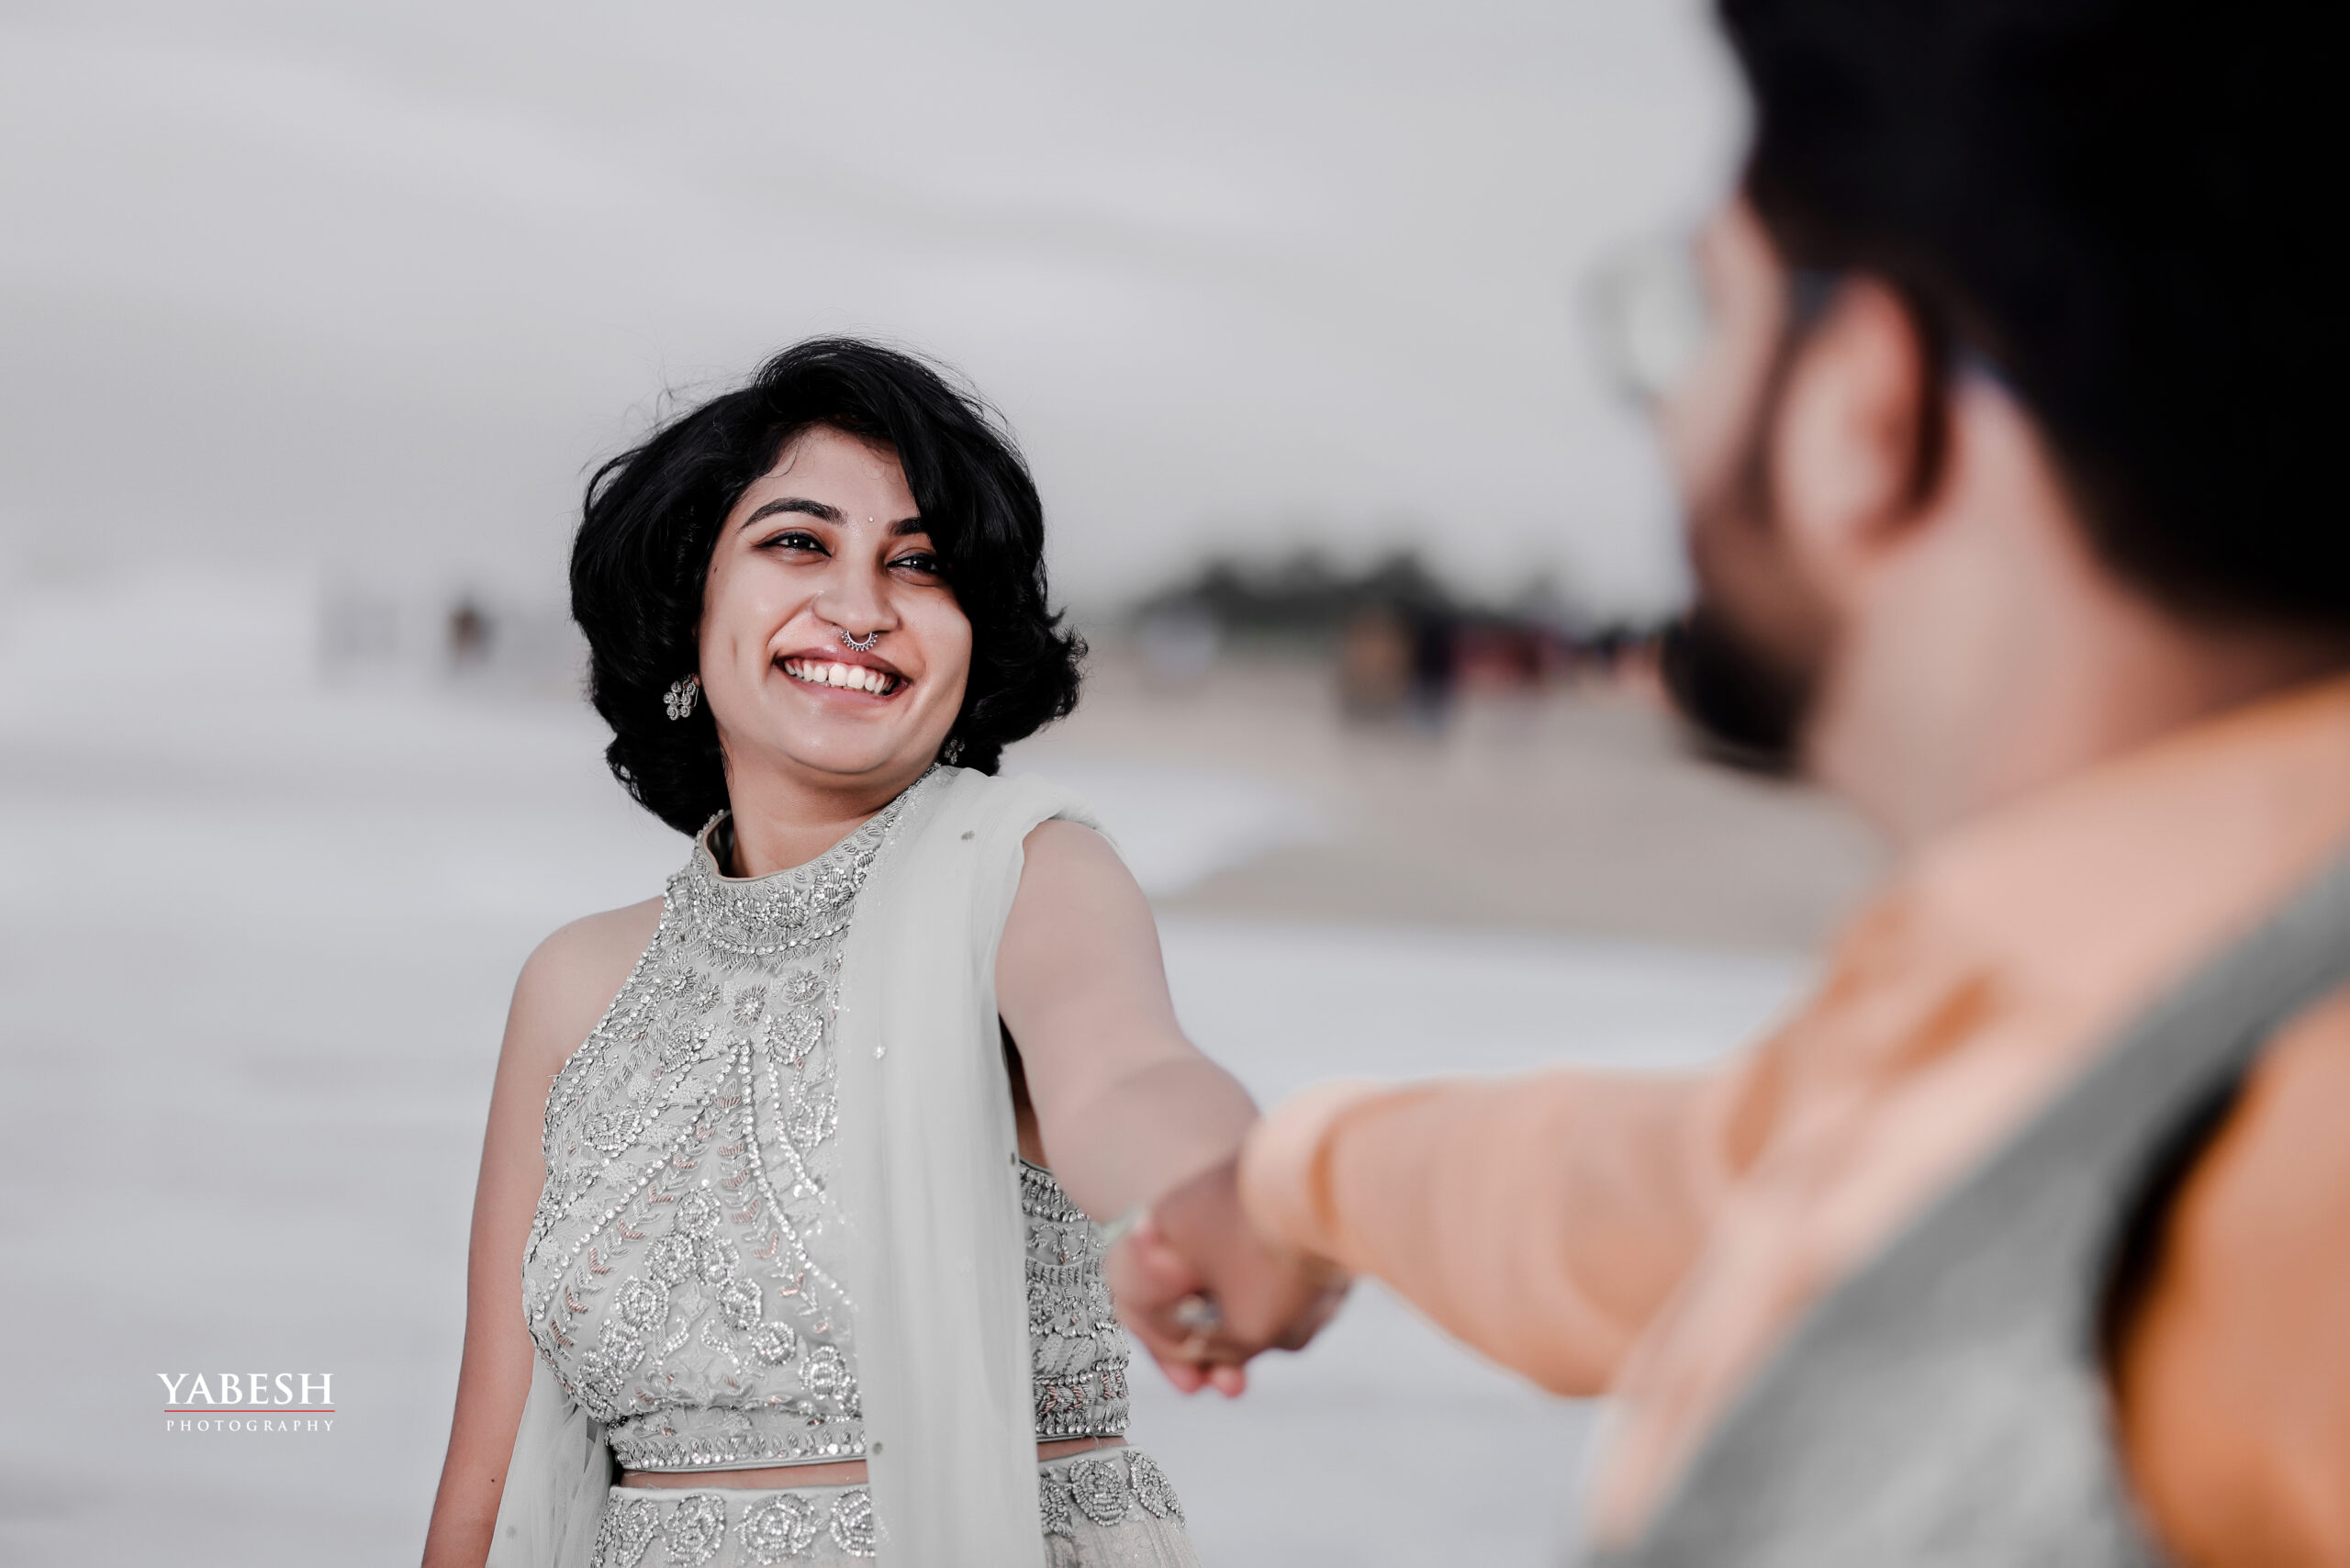 What are some amazing photos of a pre-wedding shoot in India? - Quora